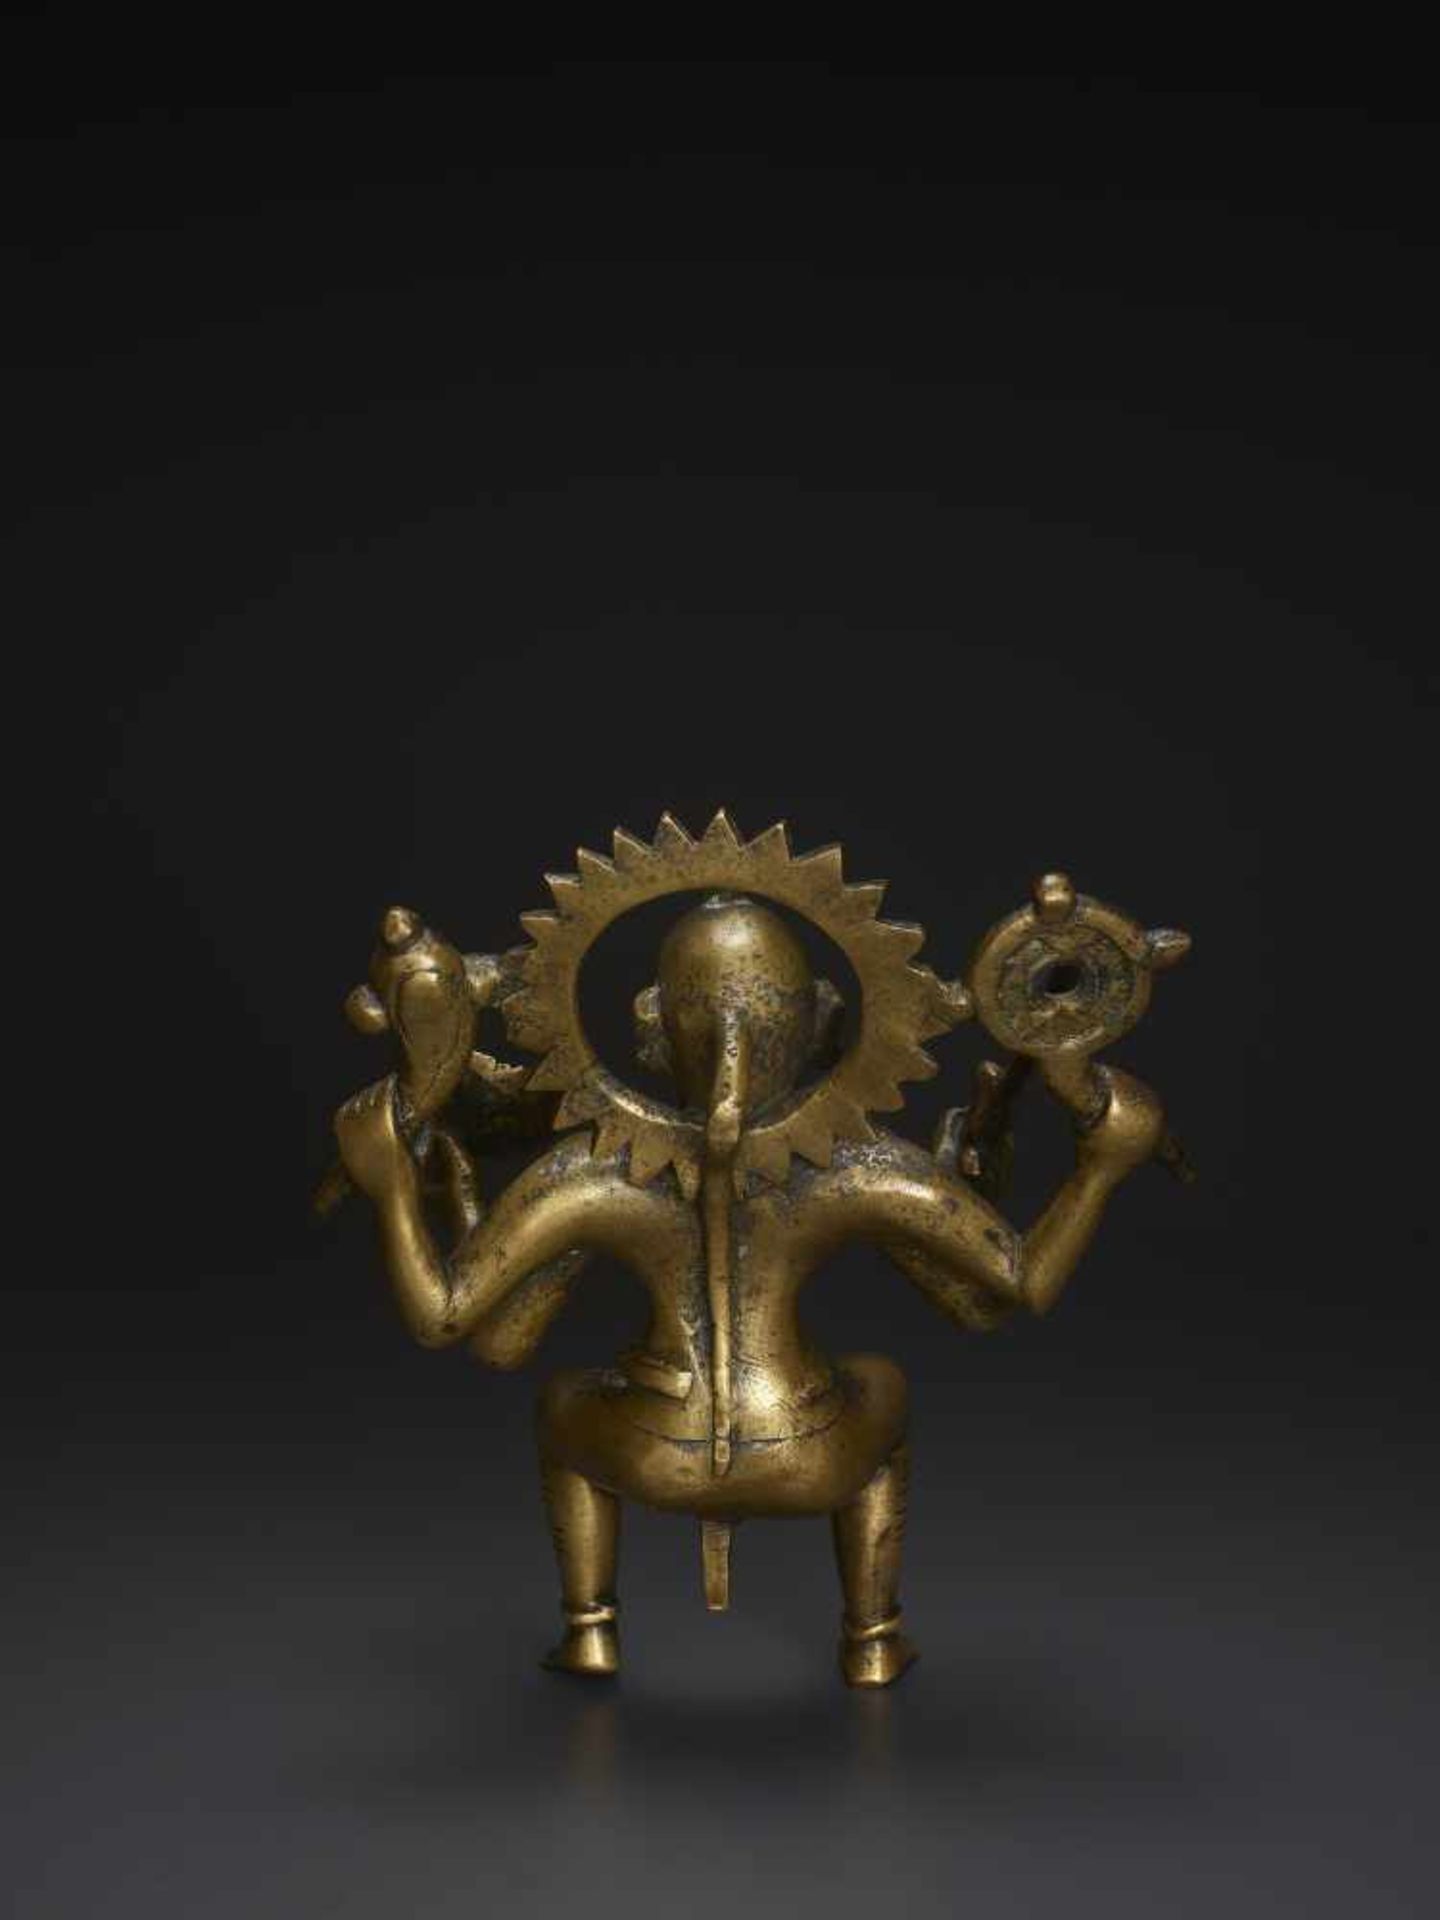 A RARE HINDU BRONZE DEITY India, 17th - 18th century. Finely cast bronze with neatly incised - Image 5 of 6